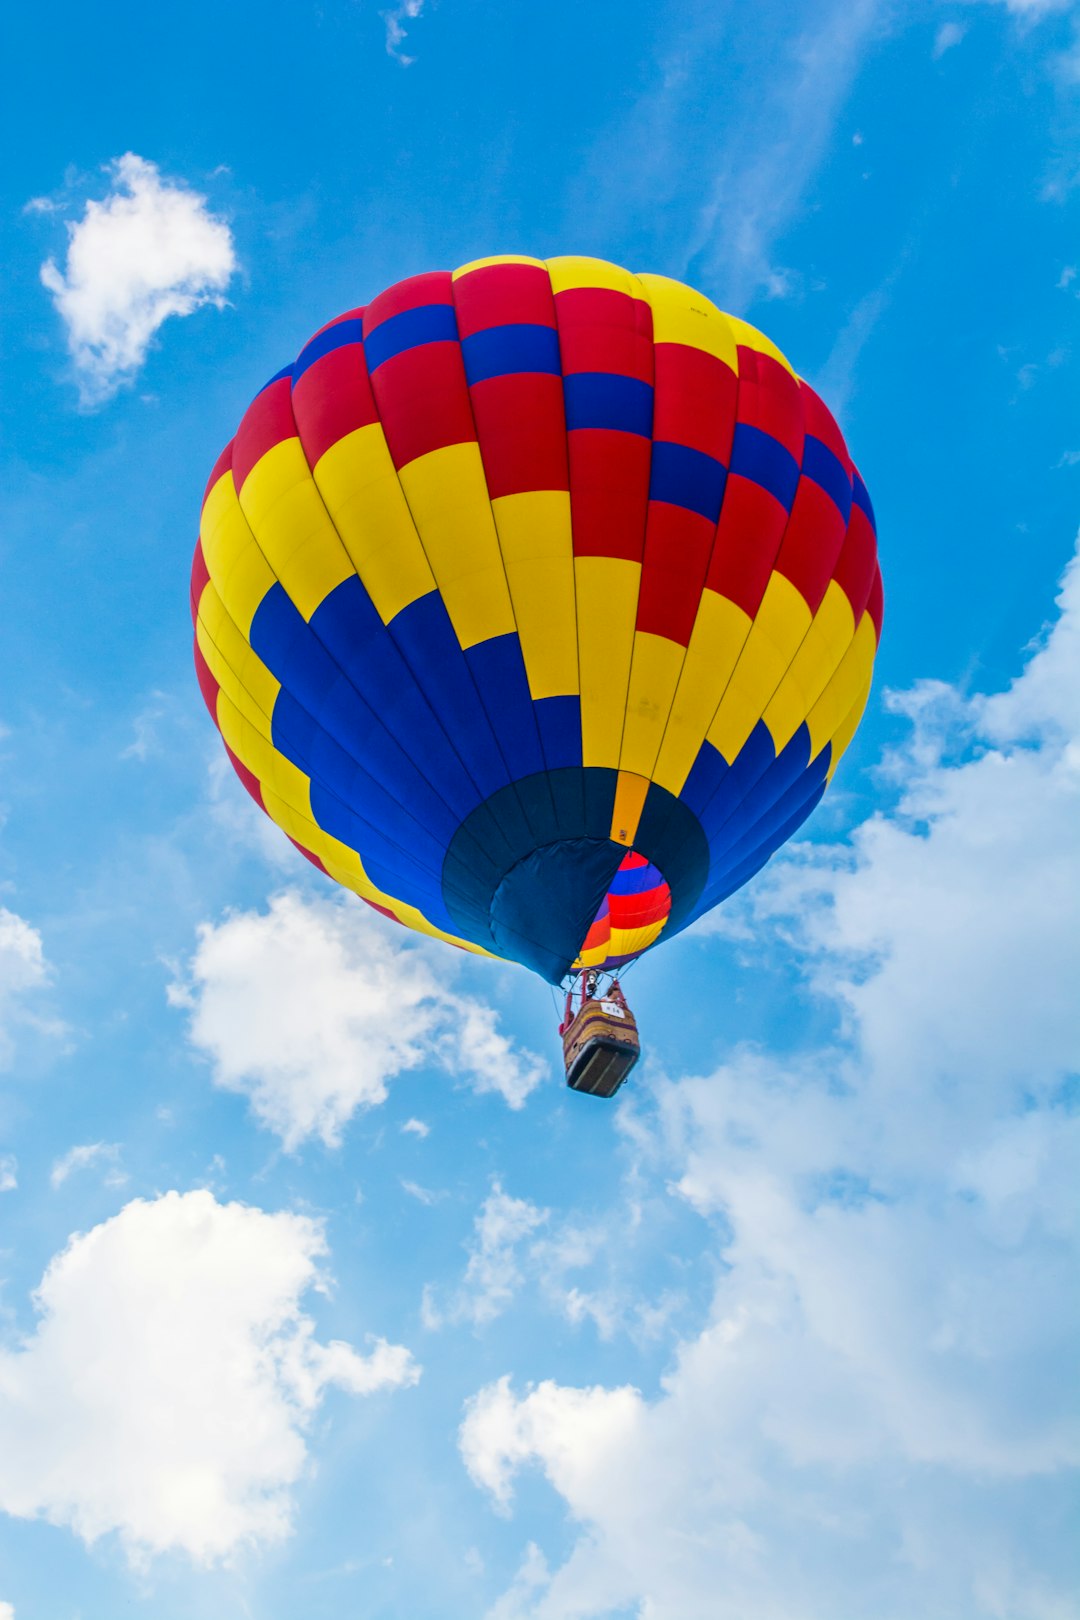 Hot air ballooning photo spot Stowe United States